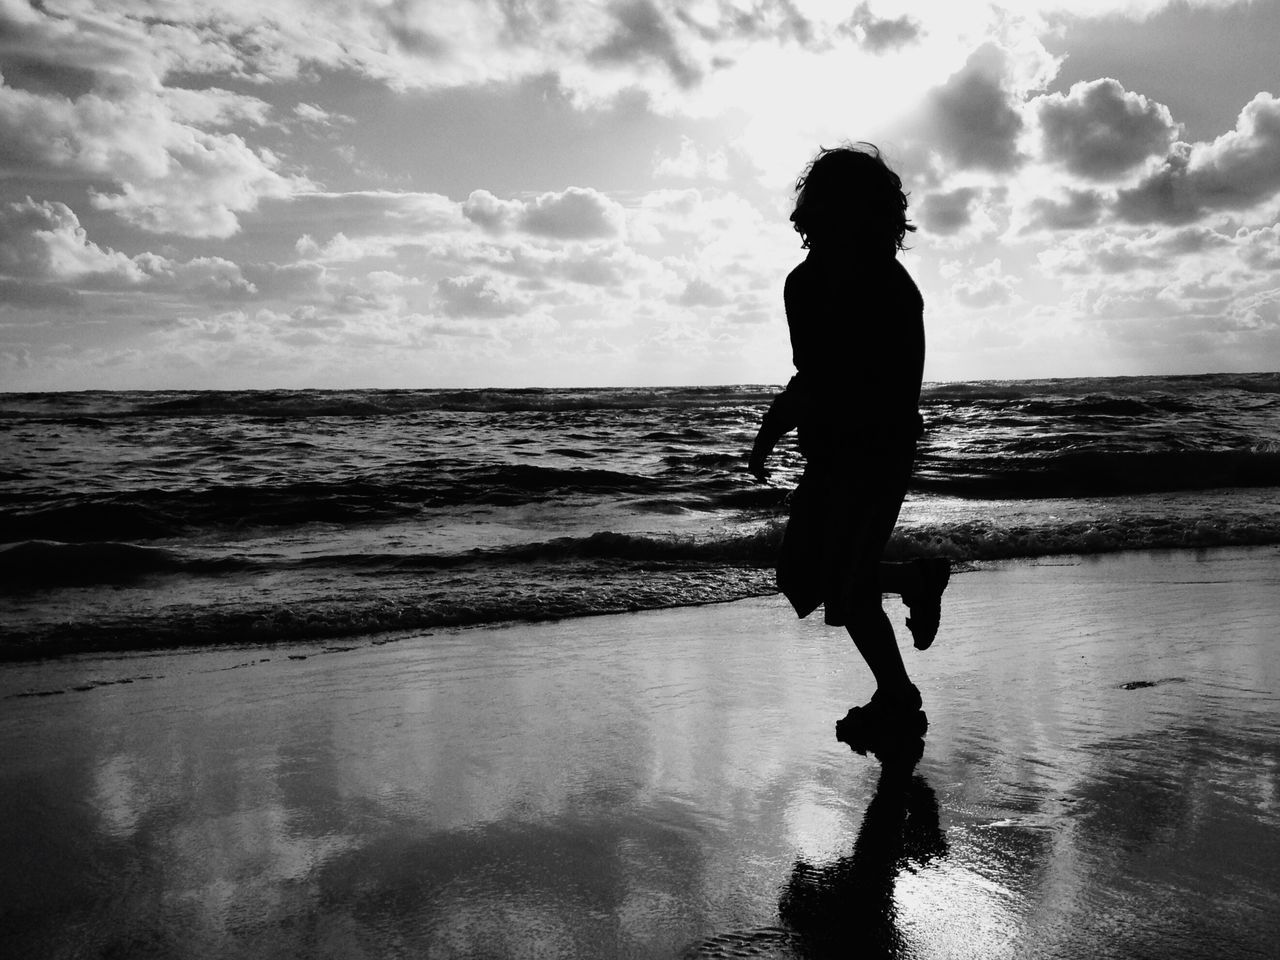 beach, cloud - sky, reflection, sea, full length, water, sky, one person, horizon over water, one woman only, outdoors, women, silhouette, leisure activity, only women, adult, people, vacations, real people, sand, adults only, nature, day, beauty in nature